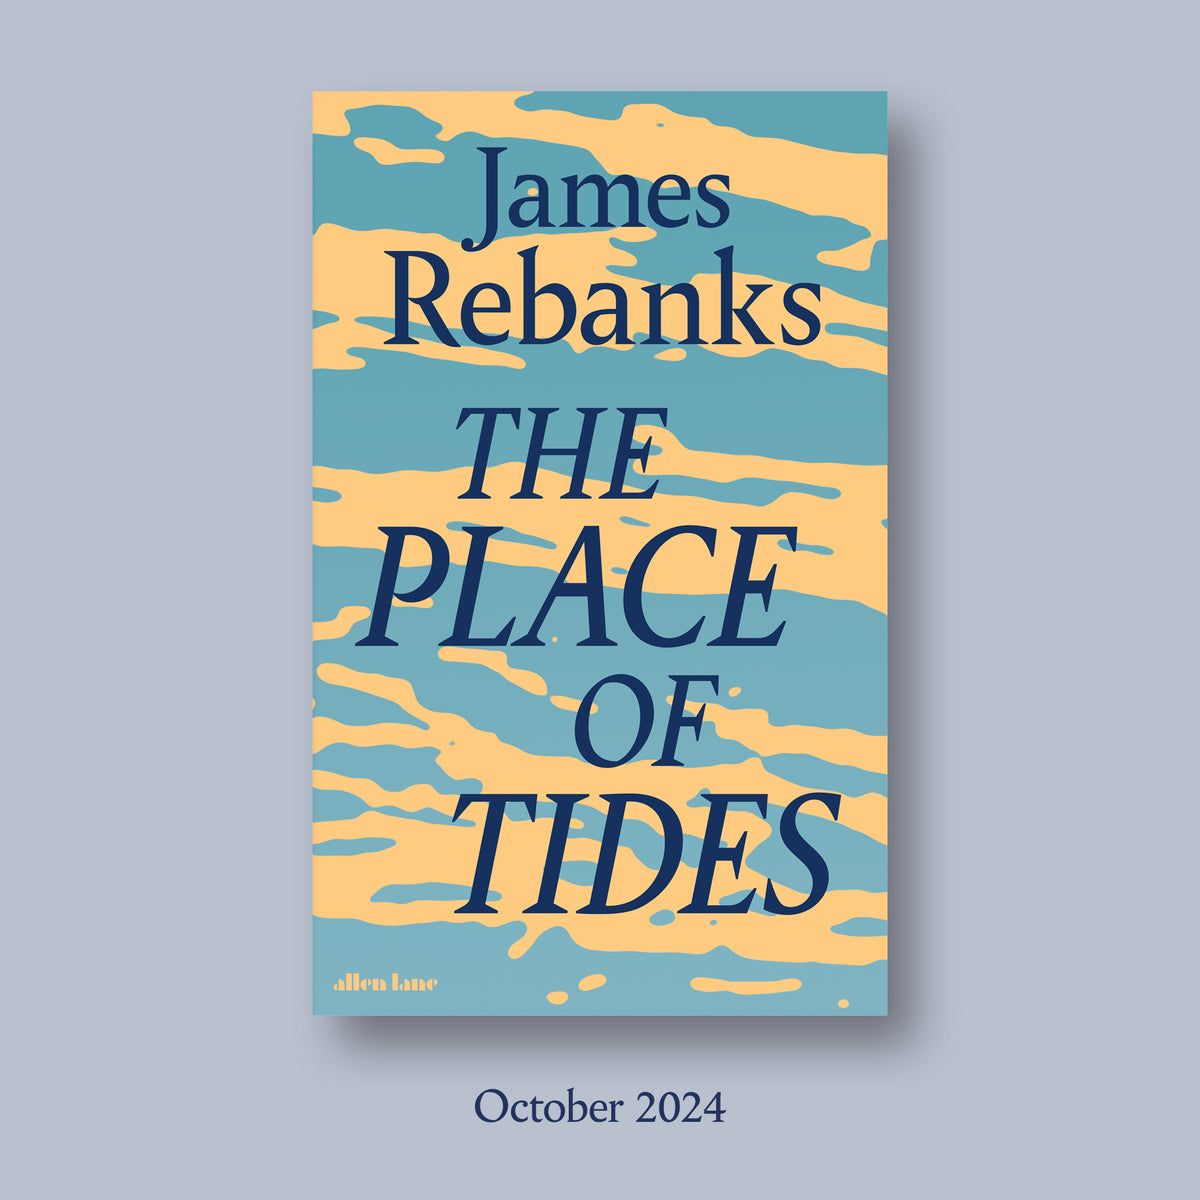 The Place of Tides by James Rebanks - PRE-ORDER NOW - 17th October 2024